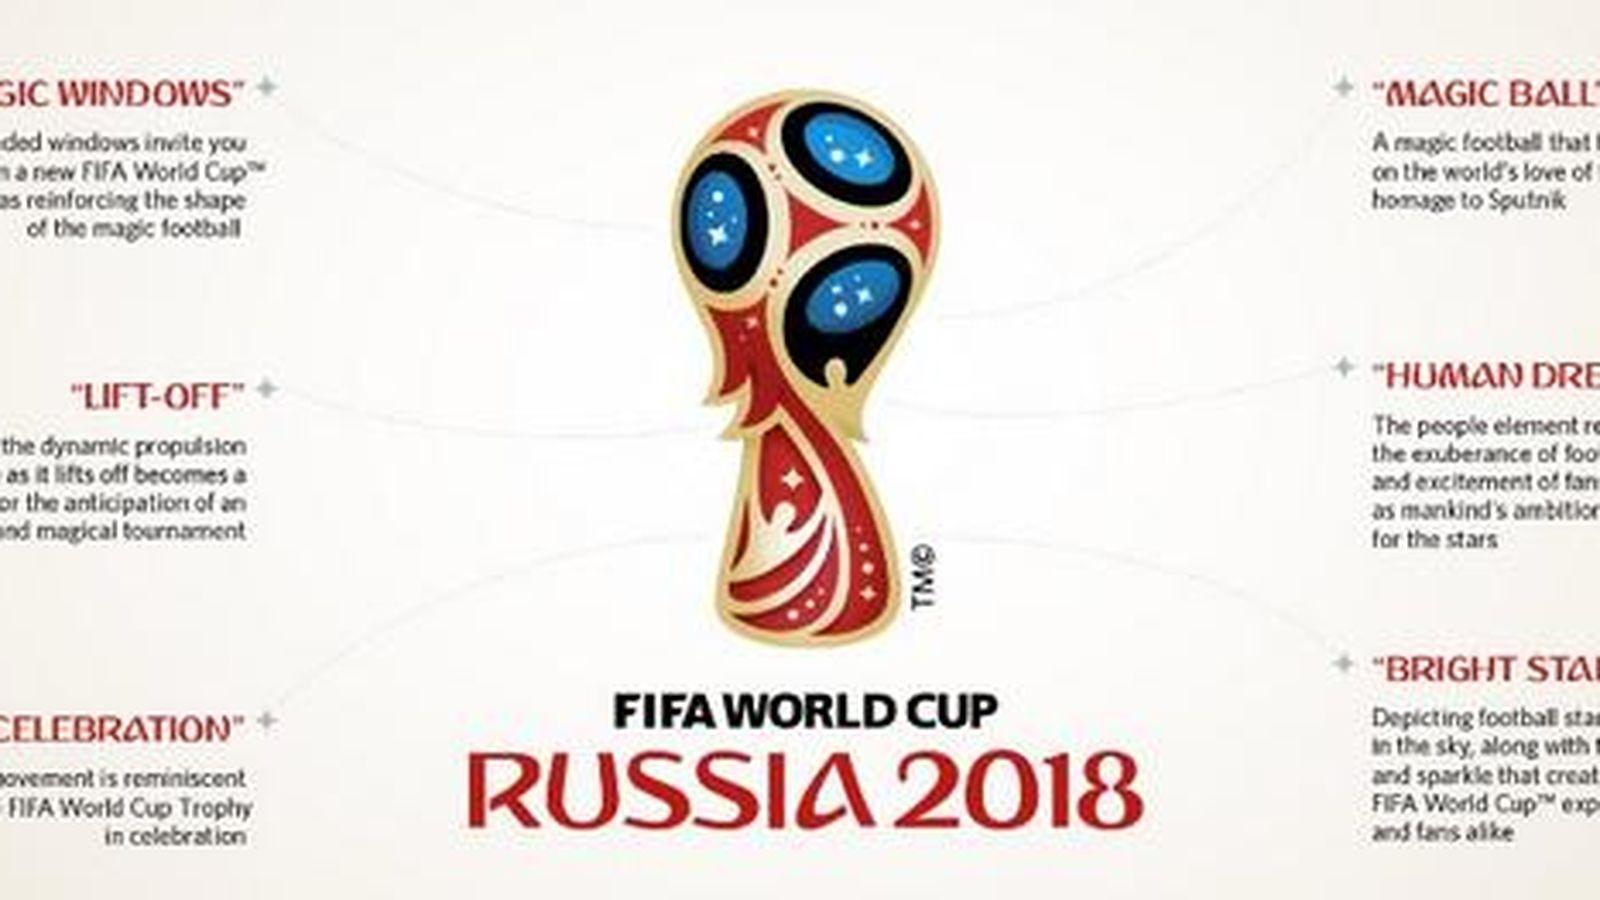 Tan World Logo - What do you think the 2018 FIFA World Cup Logo looks like